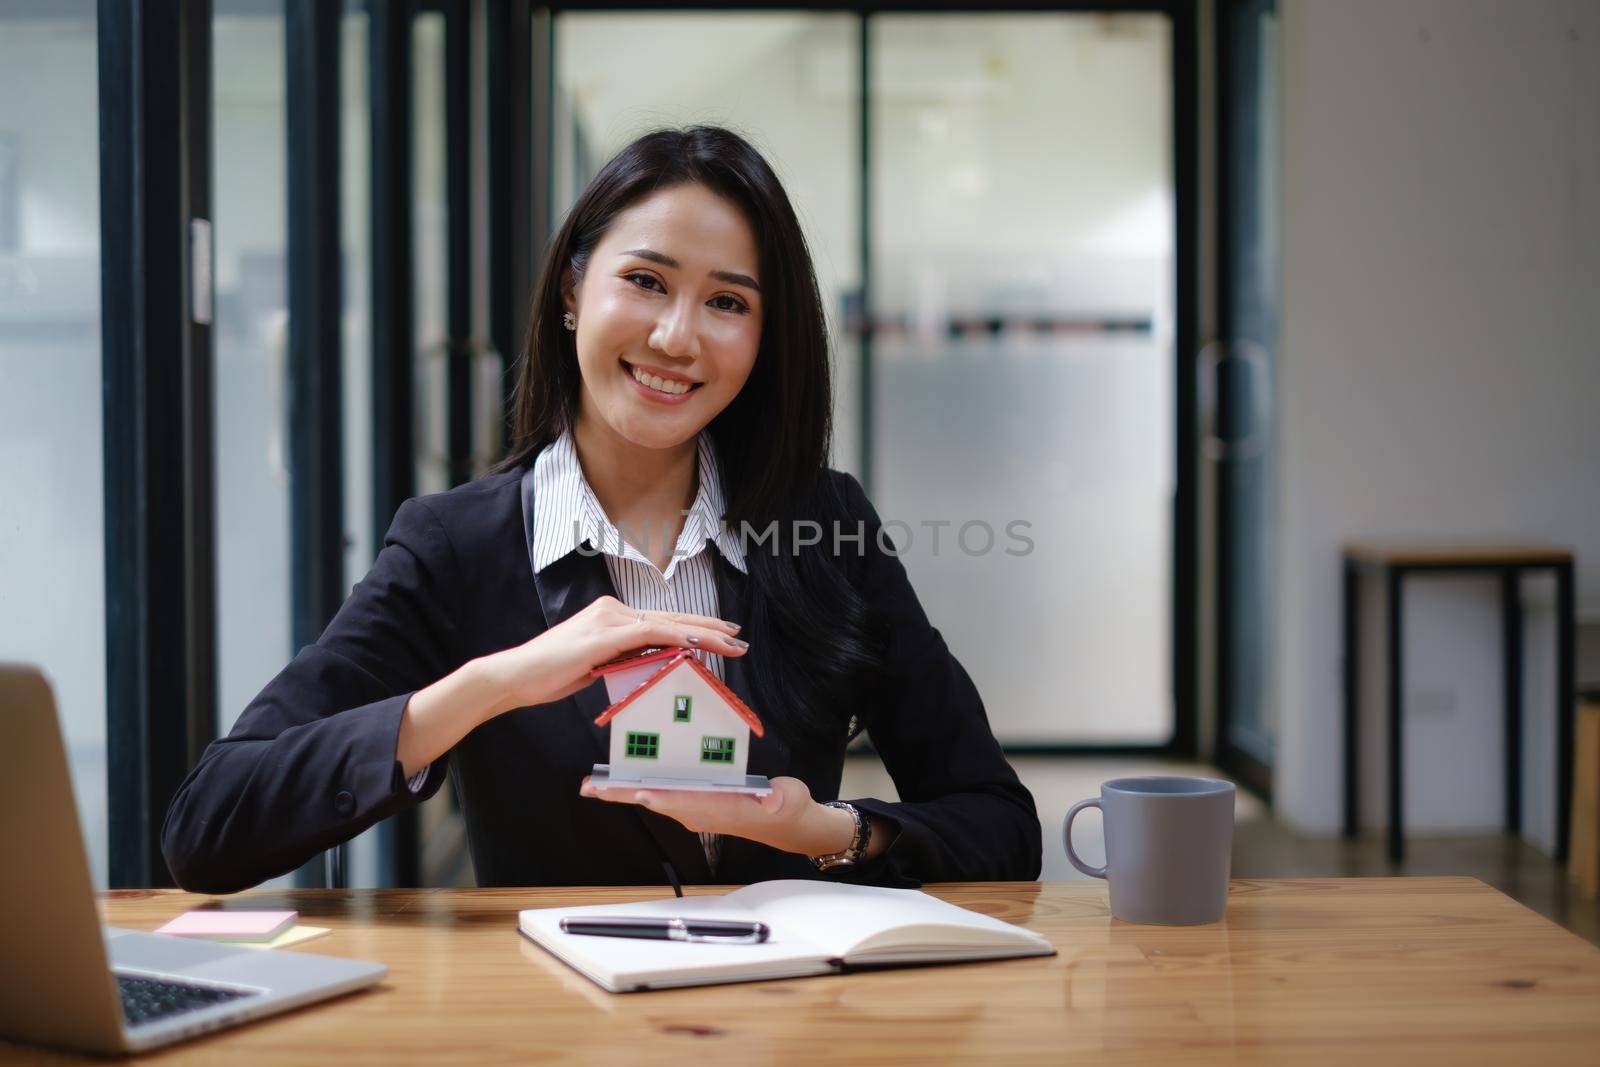 A real estate agent demonstrates the House model to clients interested in purchasing house insurance. The concept of home insurance and property by itchaznong